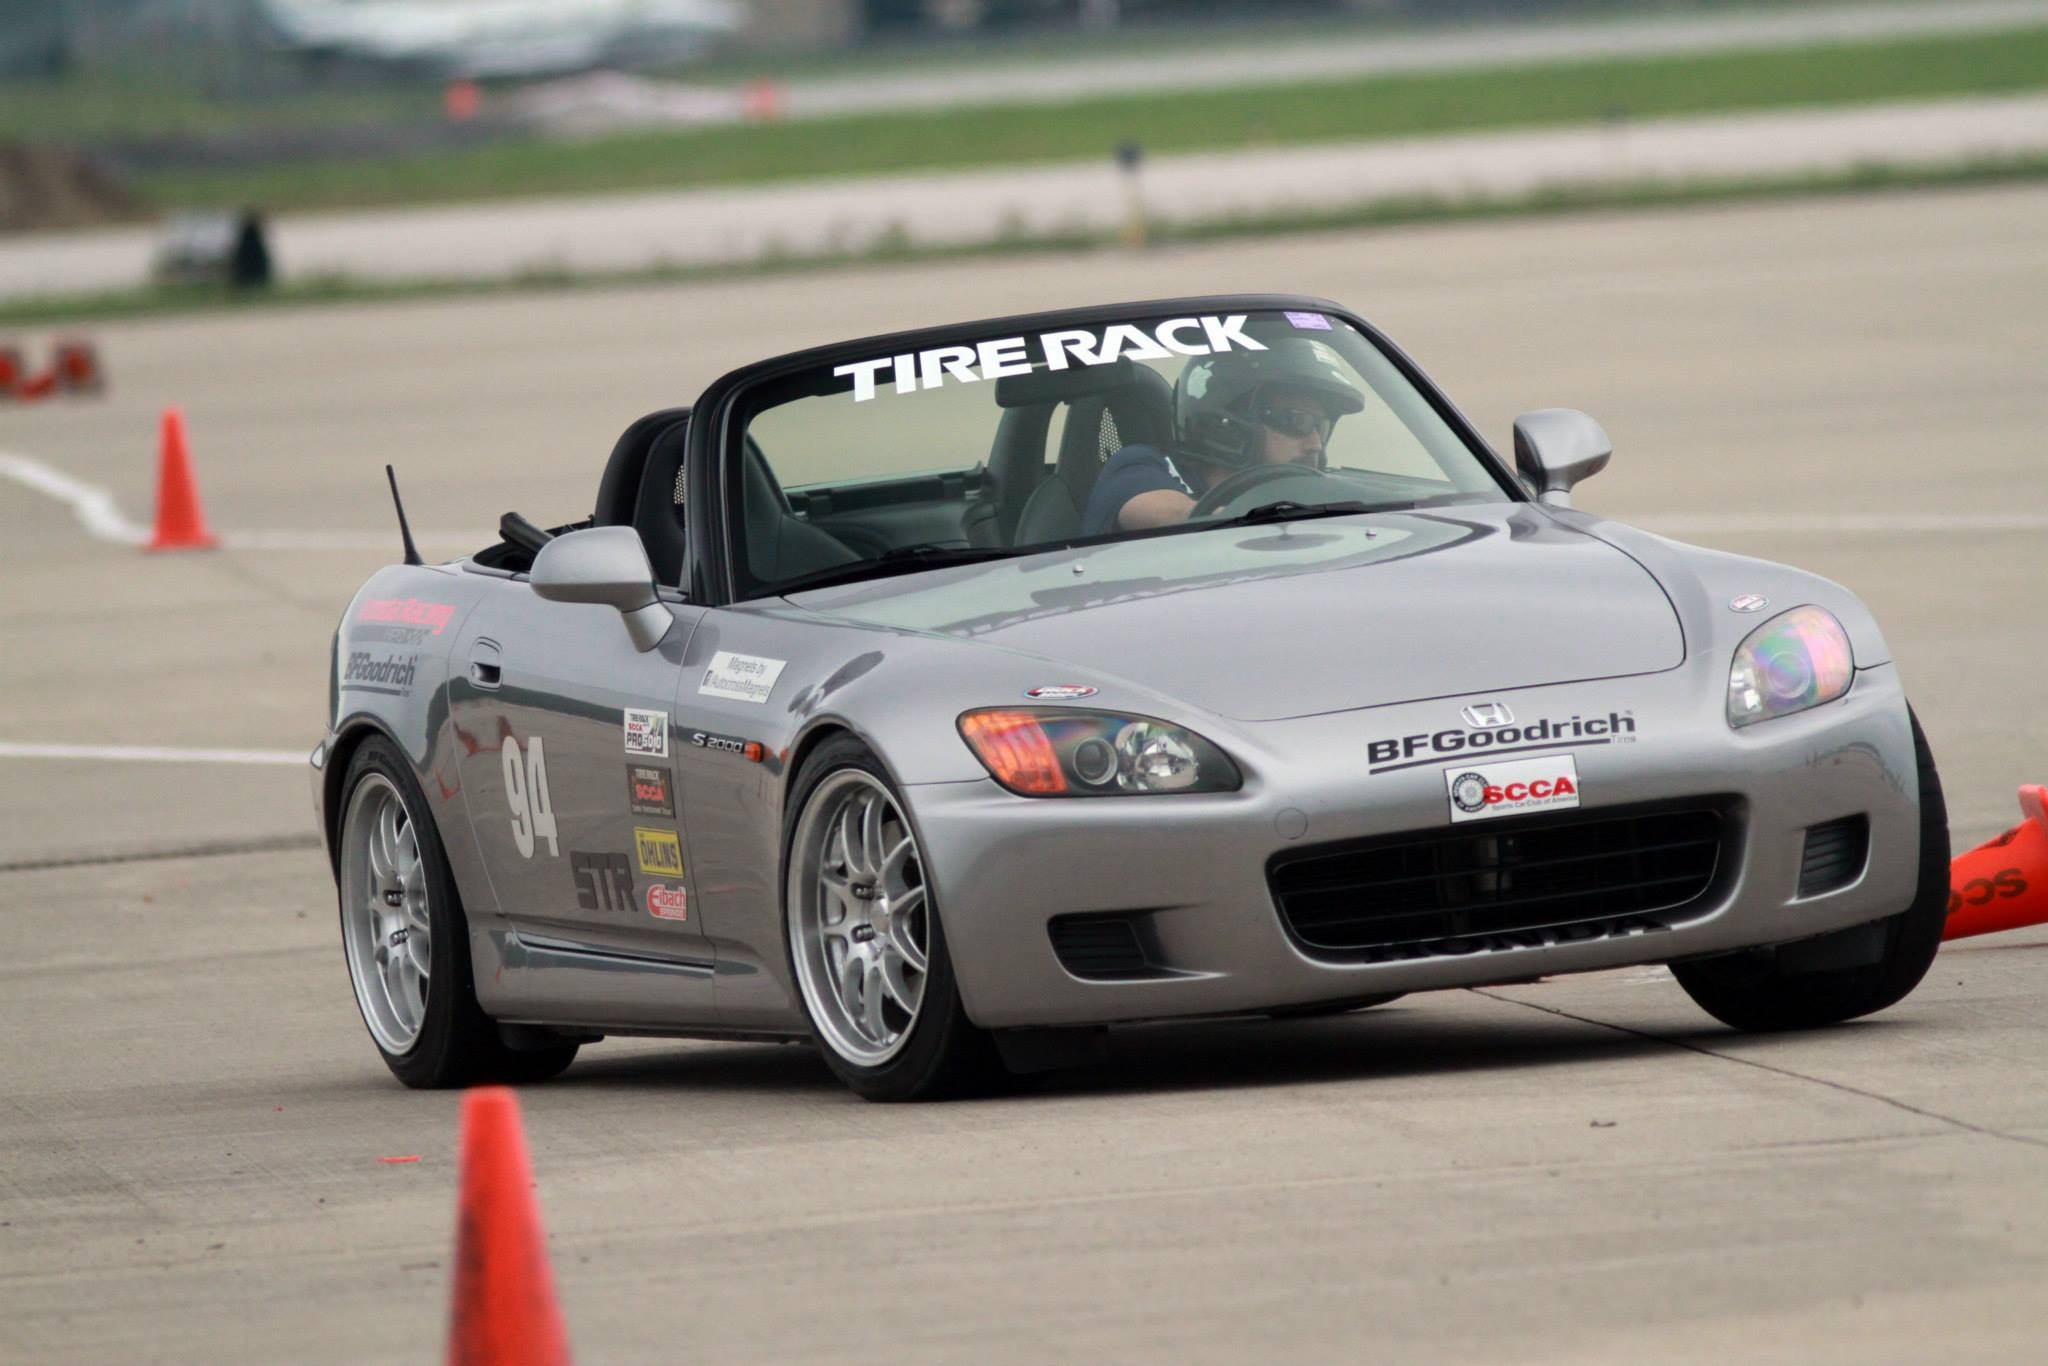 Autocross: Honda S2000, An open-top sports car at the timed auto slalom competition. 2050x1370 HD Wallpaper.